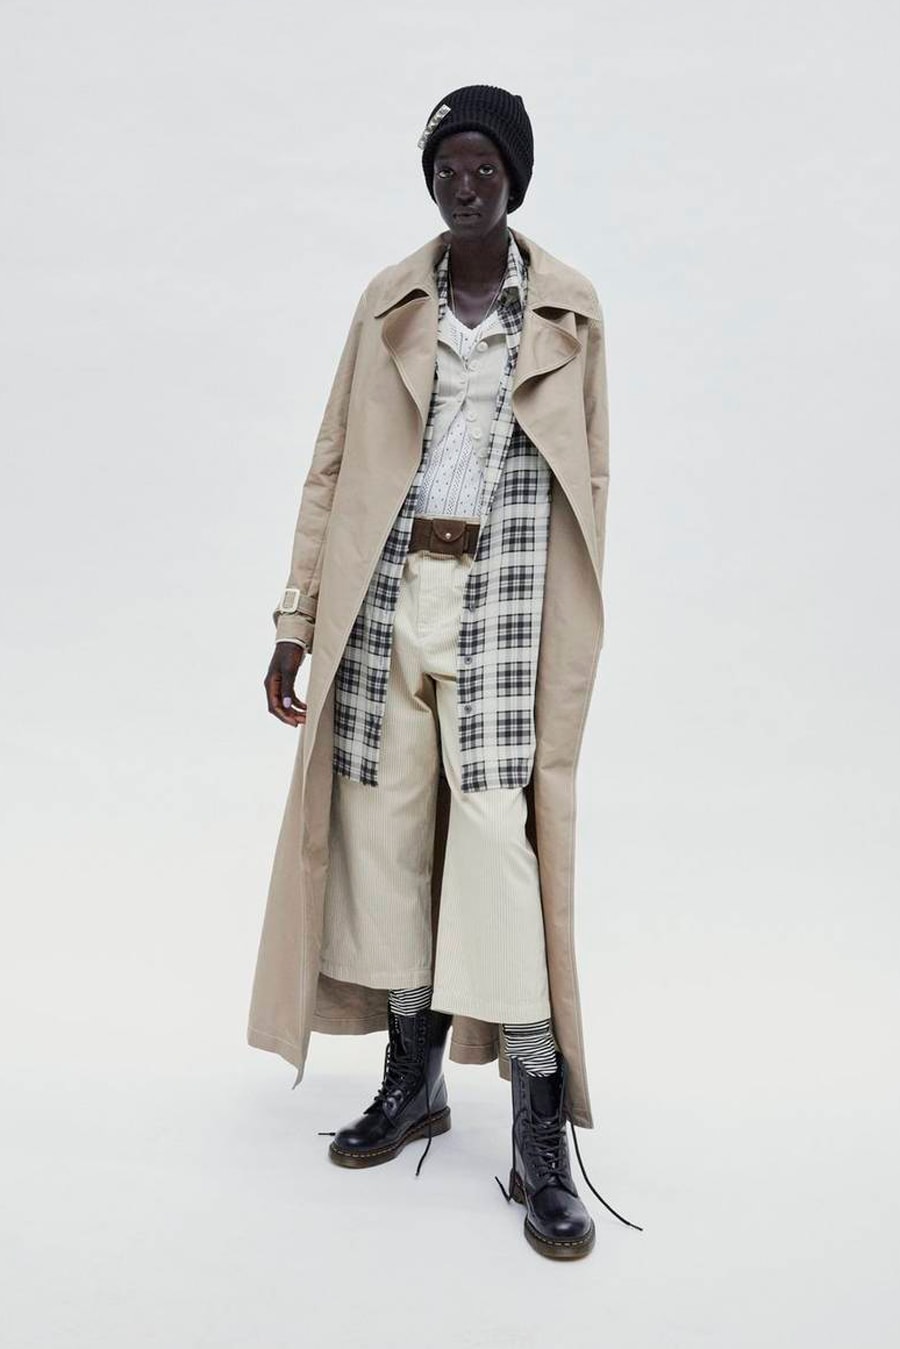 Marc Jacobs Resort 2019 Redux Collection Trench Coat Crop Pant Tan Button Down White Dr. Martens 10-Eye Letter Boot Black